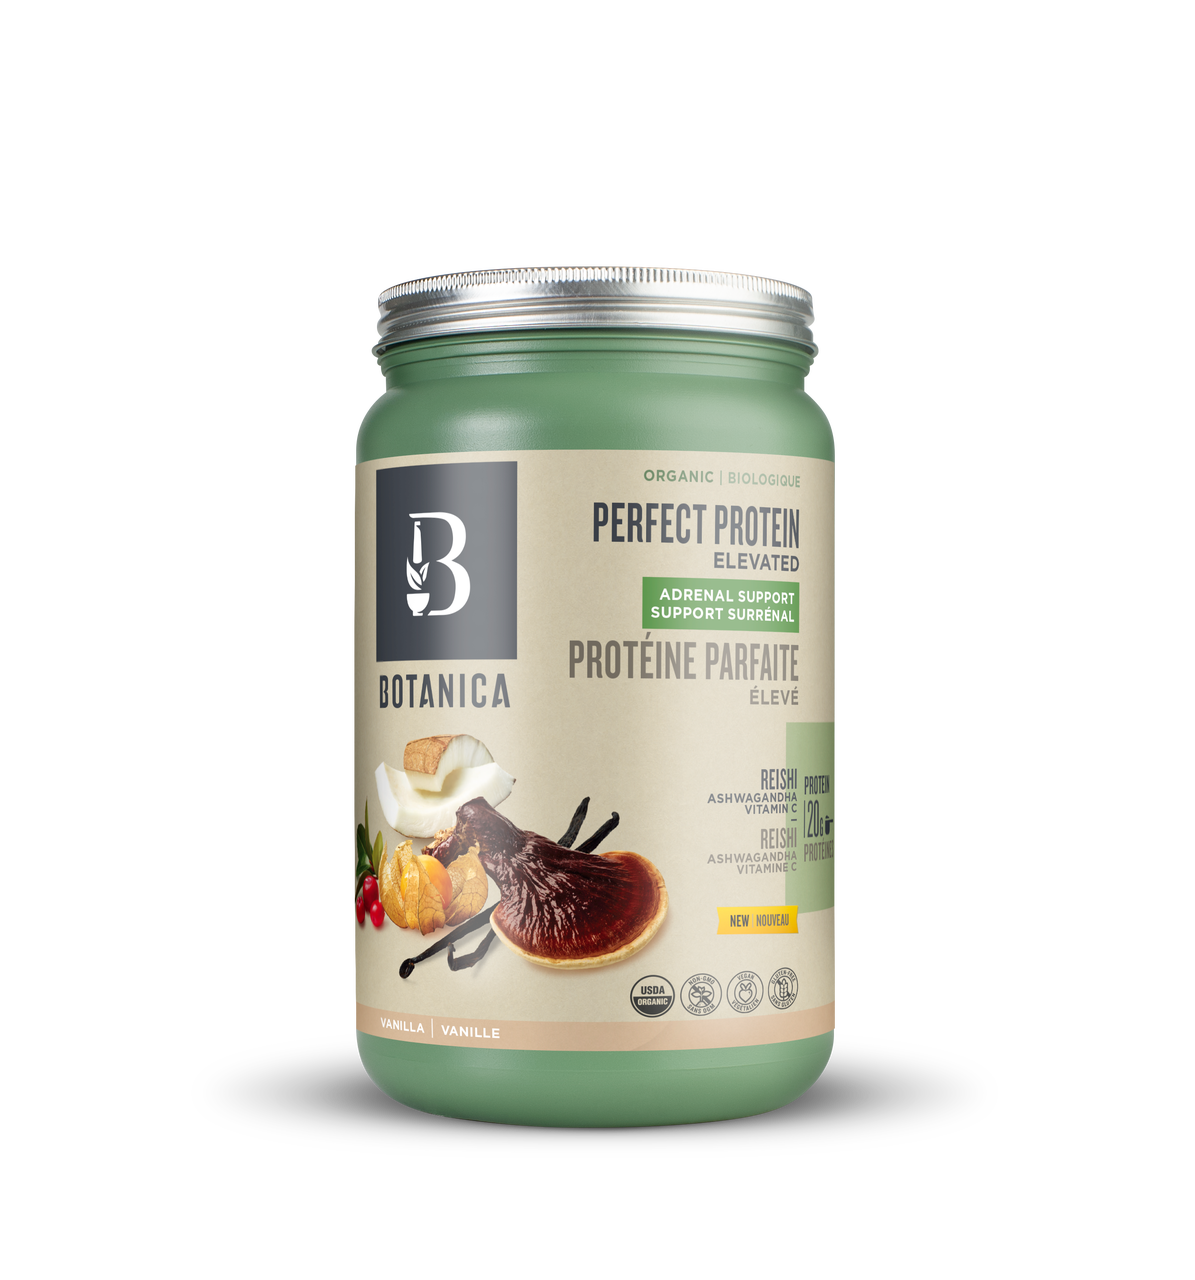 Botanica Perfect Protein Elevated - Adrenal Support (642g) - Lifestyle Markets